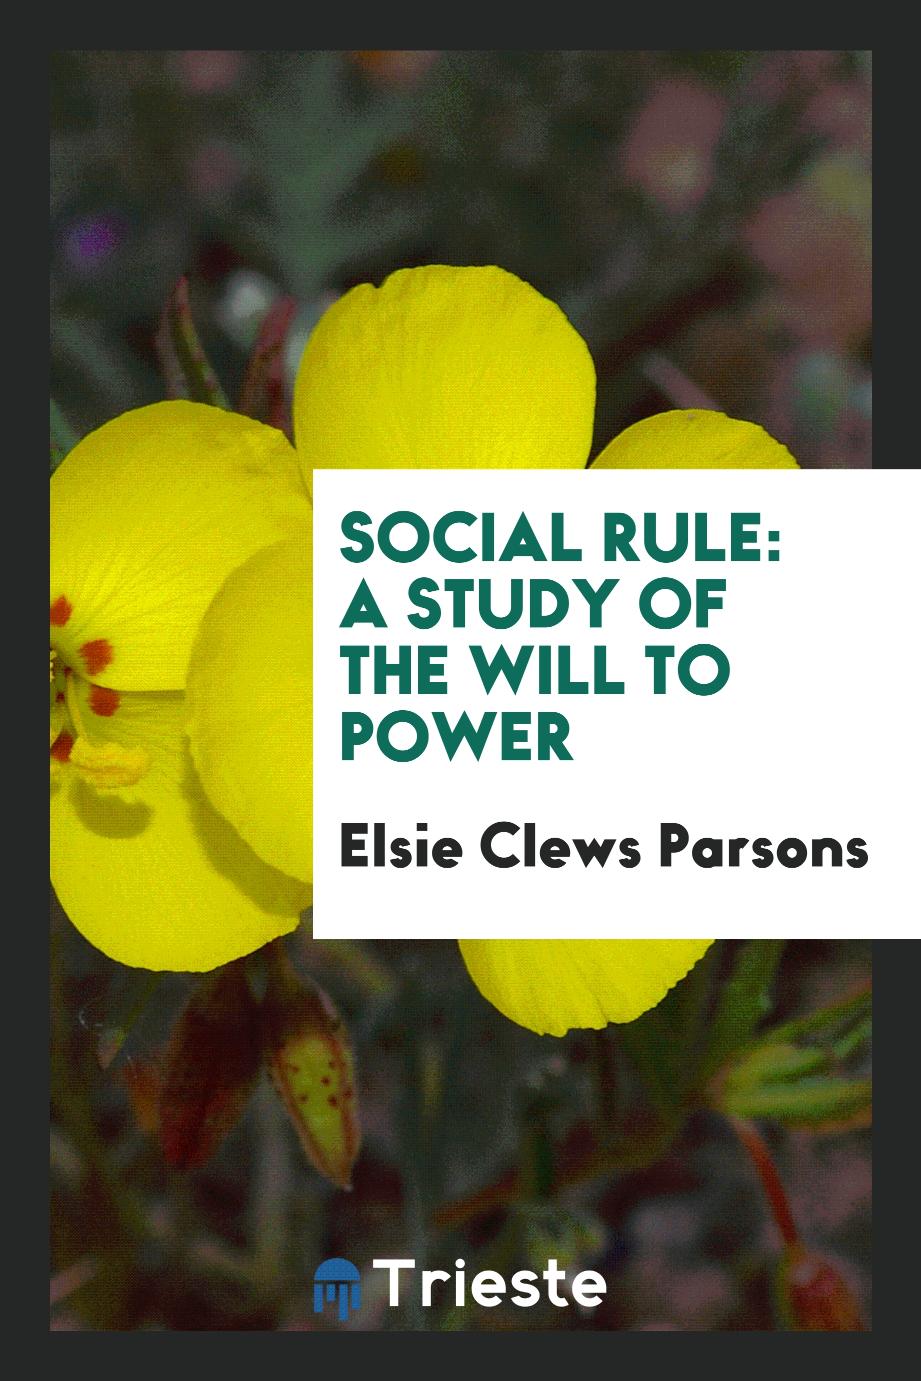 Social Rule: A Study of the Will to Power